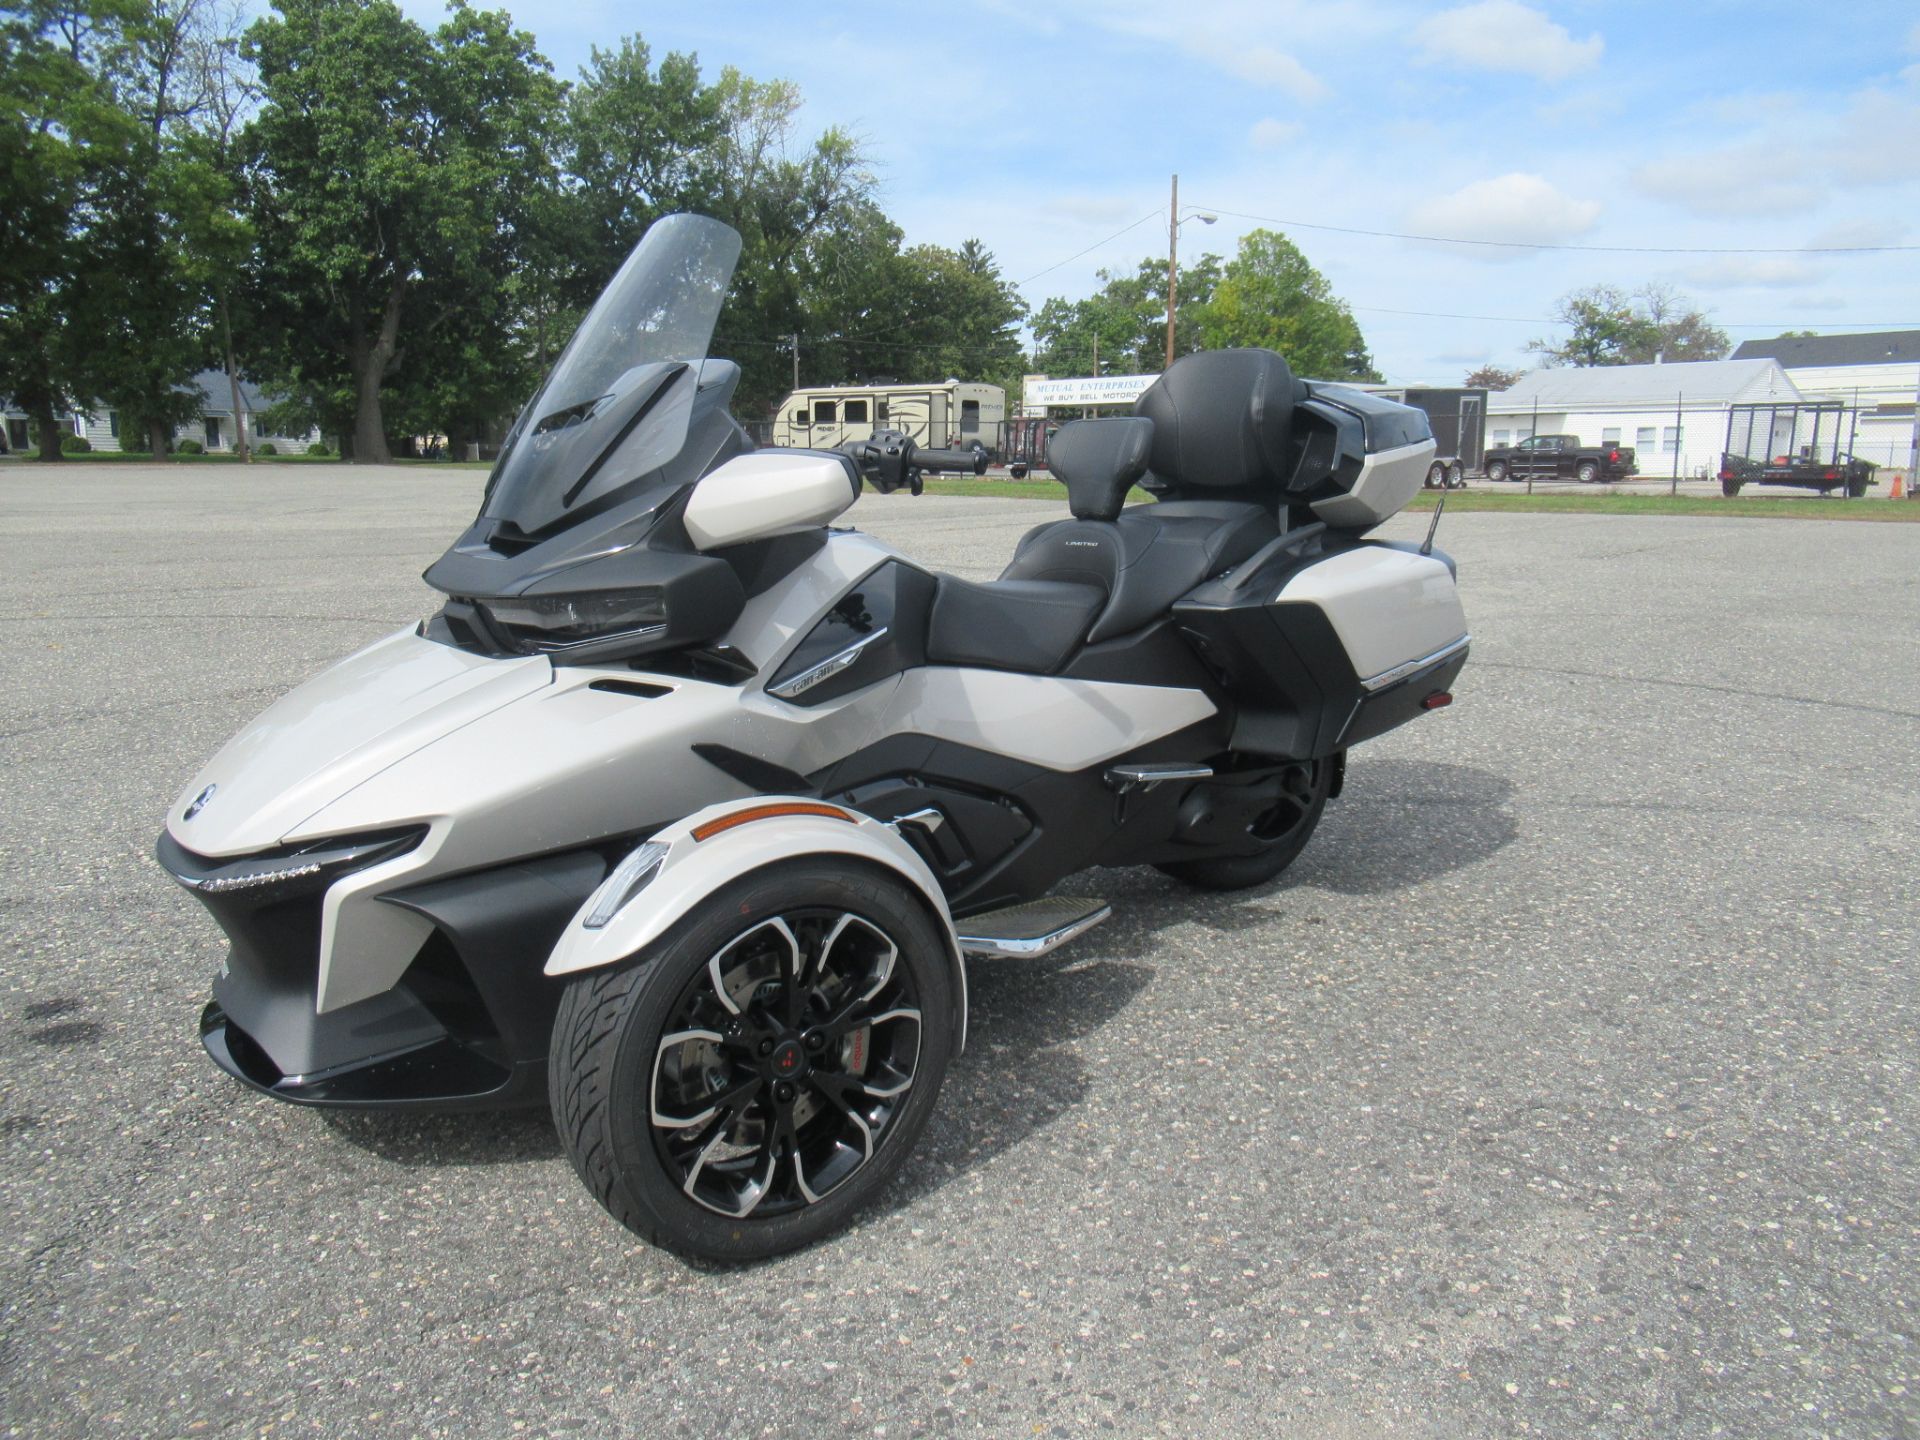 2021 Can-Am Spyder RT Limited in Springfield, Massachusetts - Photo 5